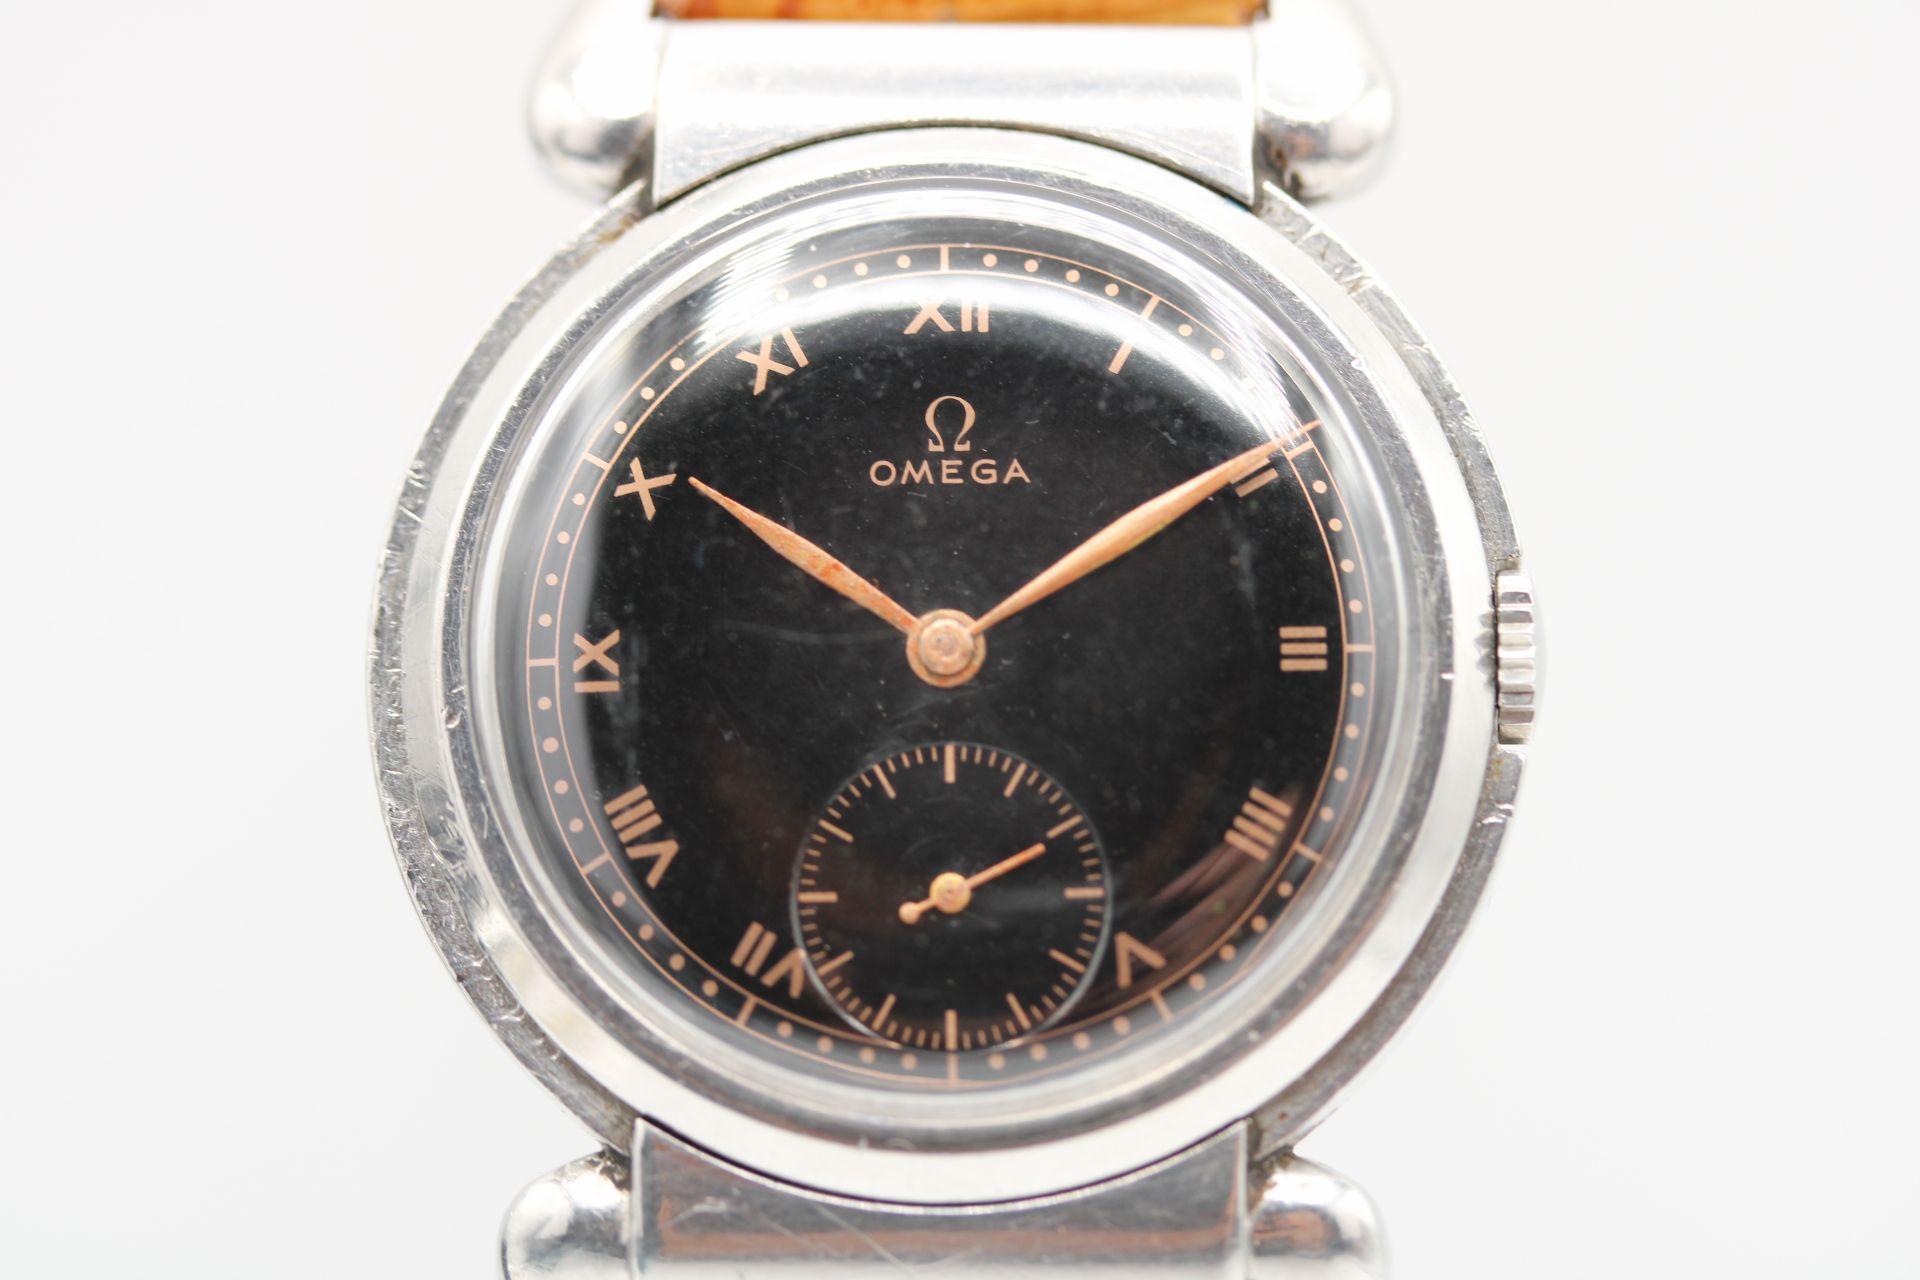 A rare find vintage Omega Bullhorn lug watch from 1936. In fine working order this vintage piece is in excellent all round condition. Rare black Gilt dial that appears in fine original order. Bronze coloured hands and roman numeral hour markers with